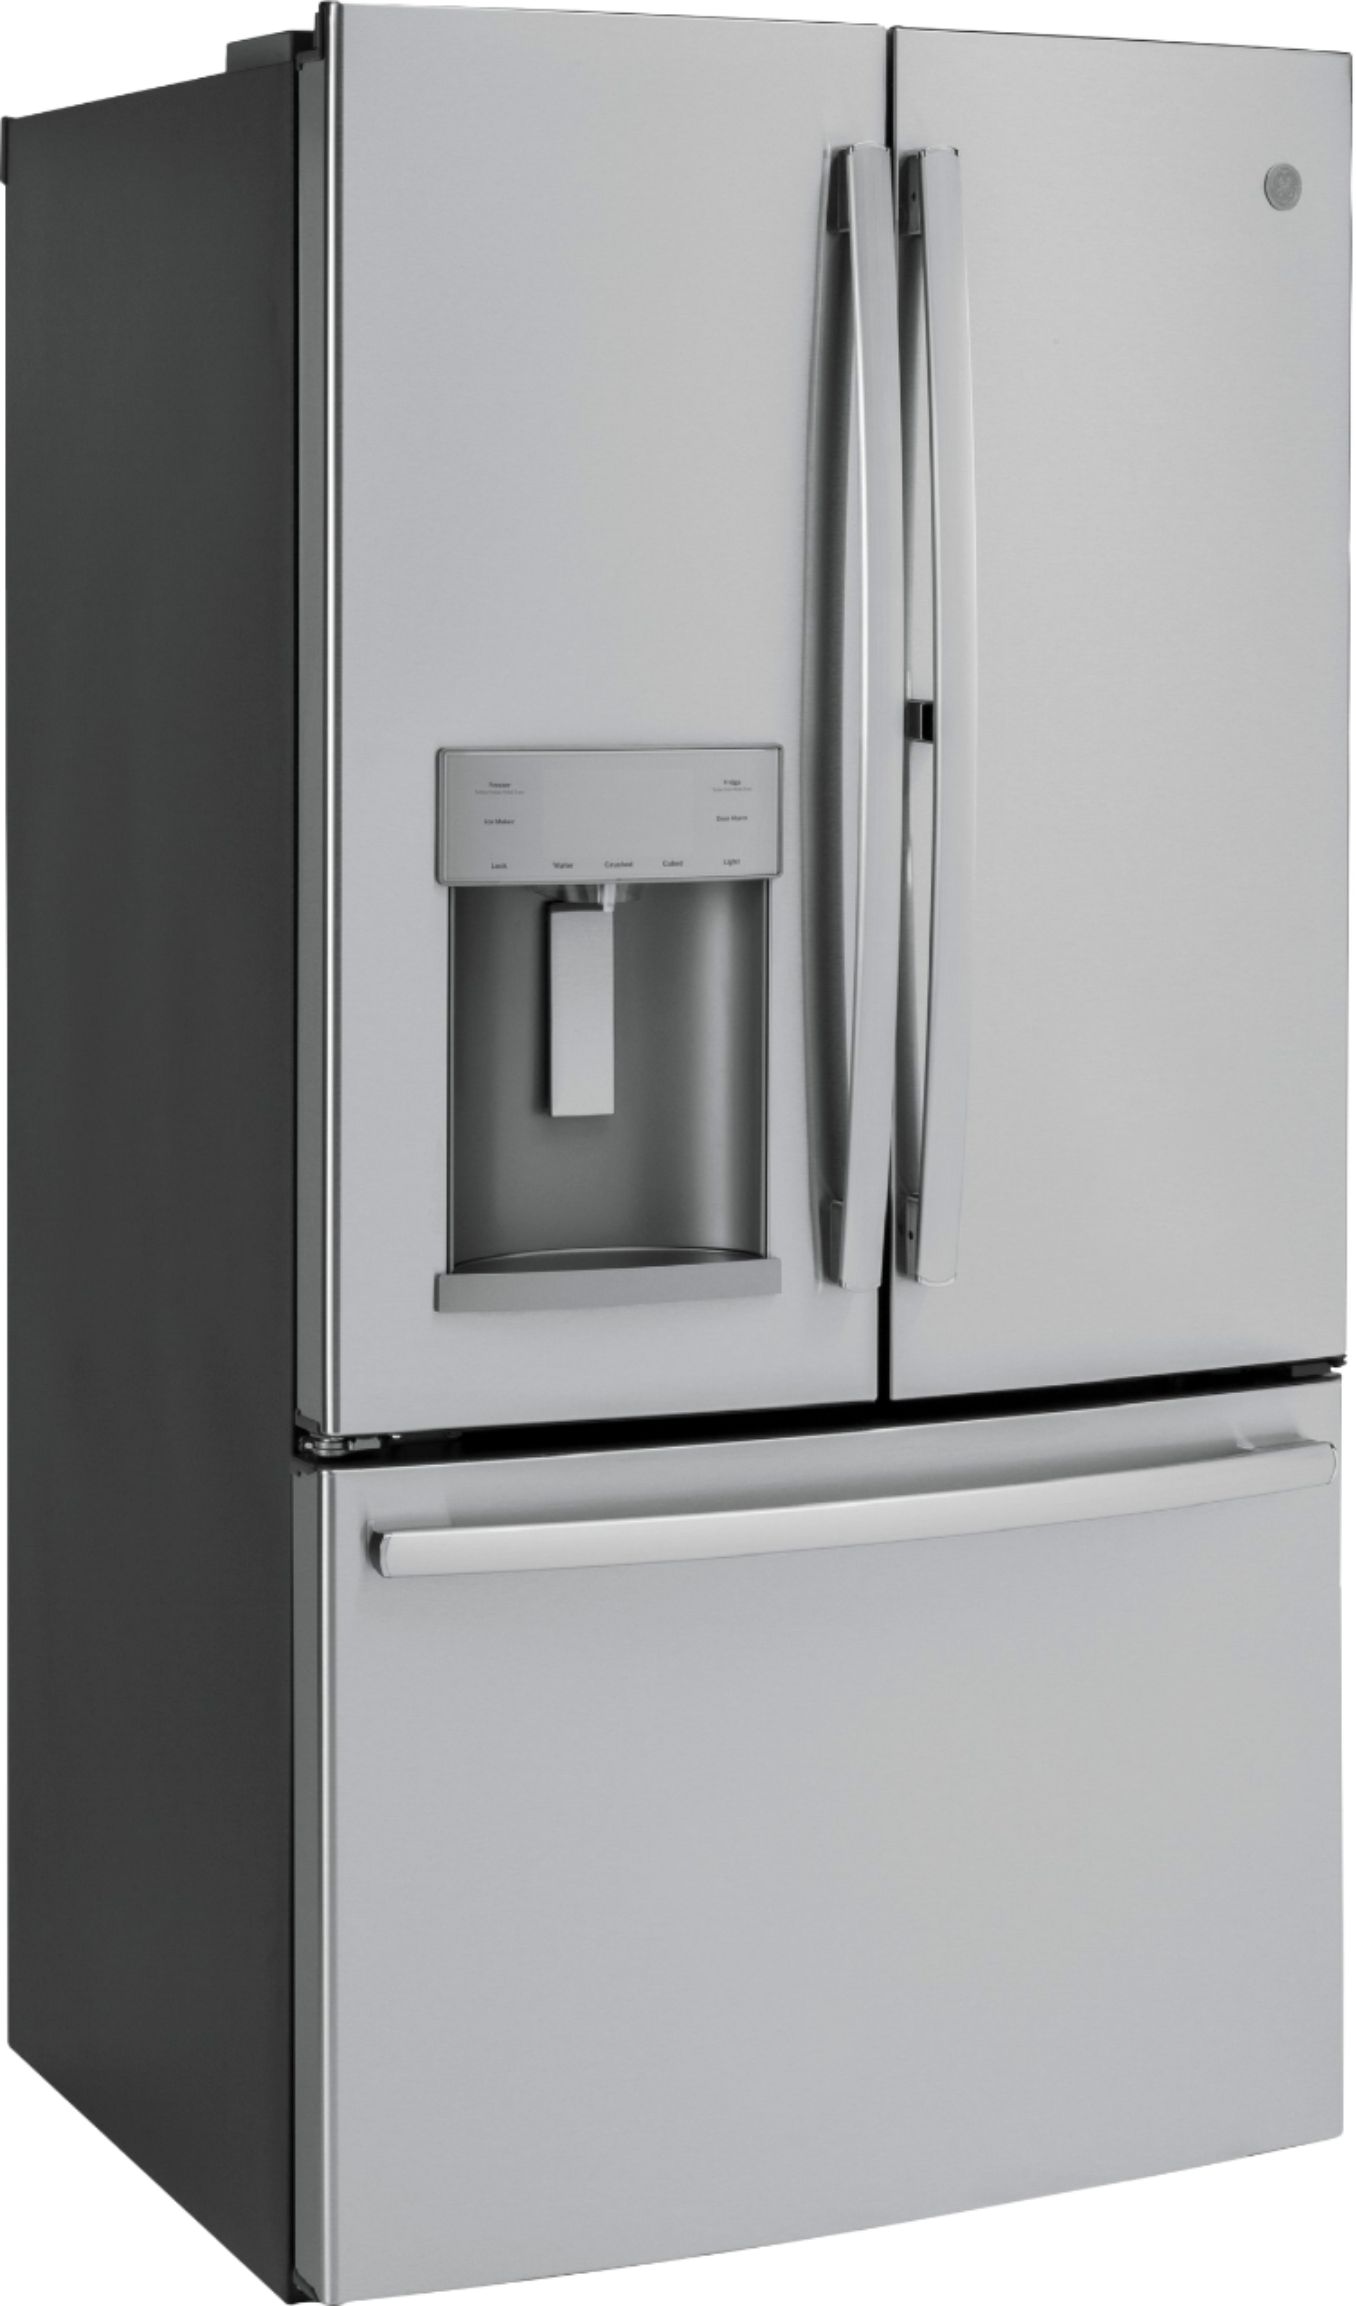 Angle View: Viking - Professional 5 Series Quiet Cool 29.1 Cu. Ft. Side-by-Side Built-In Refrigerator - San marzano red